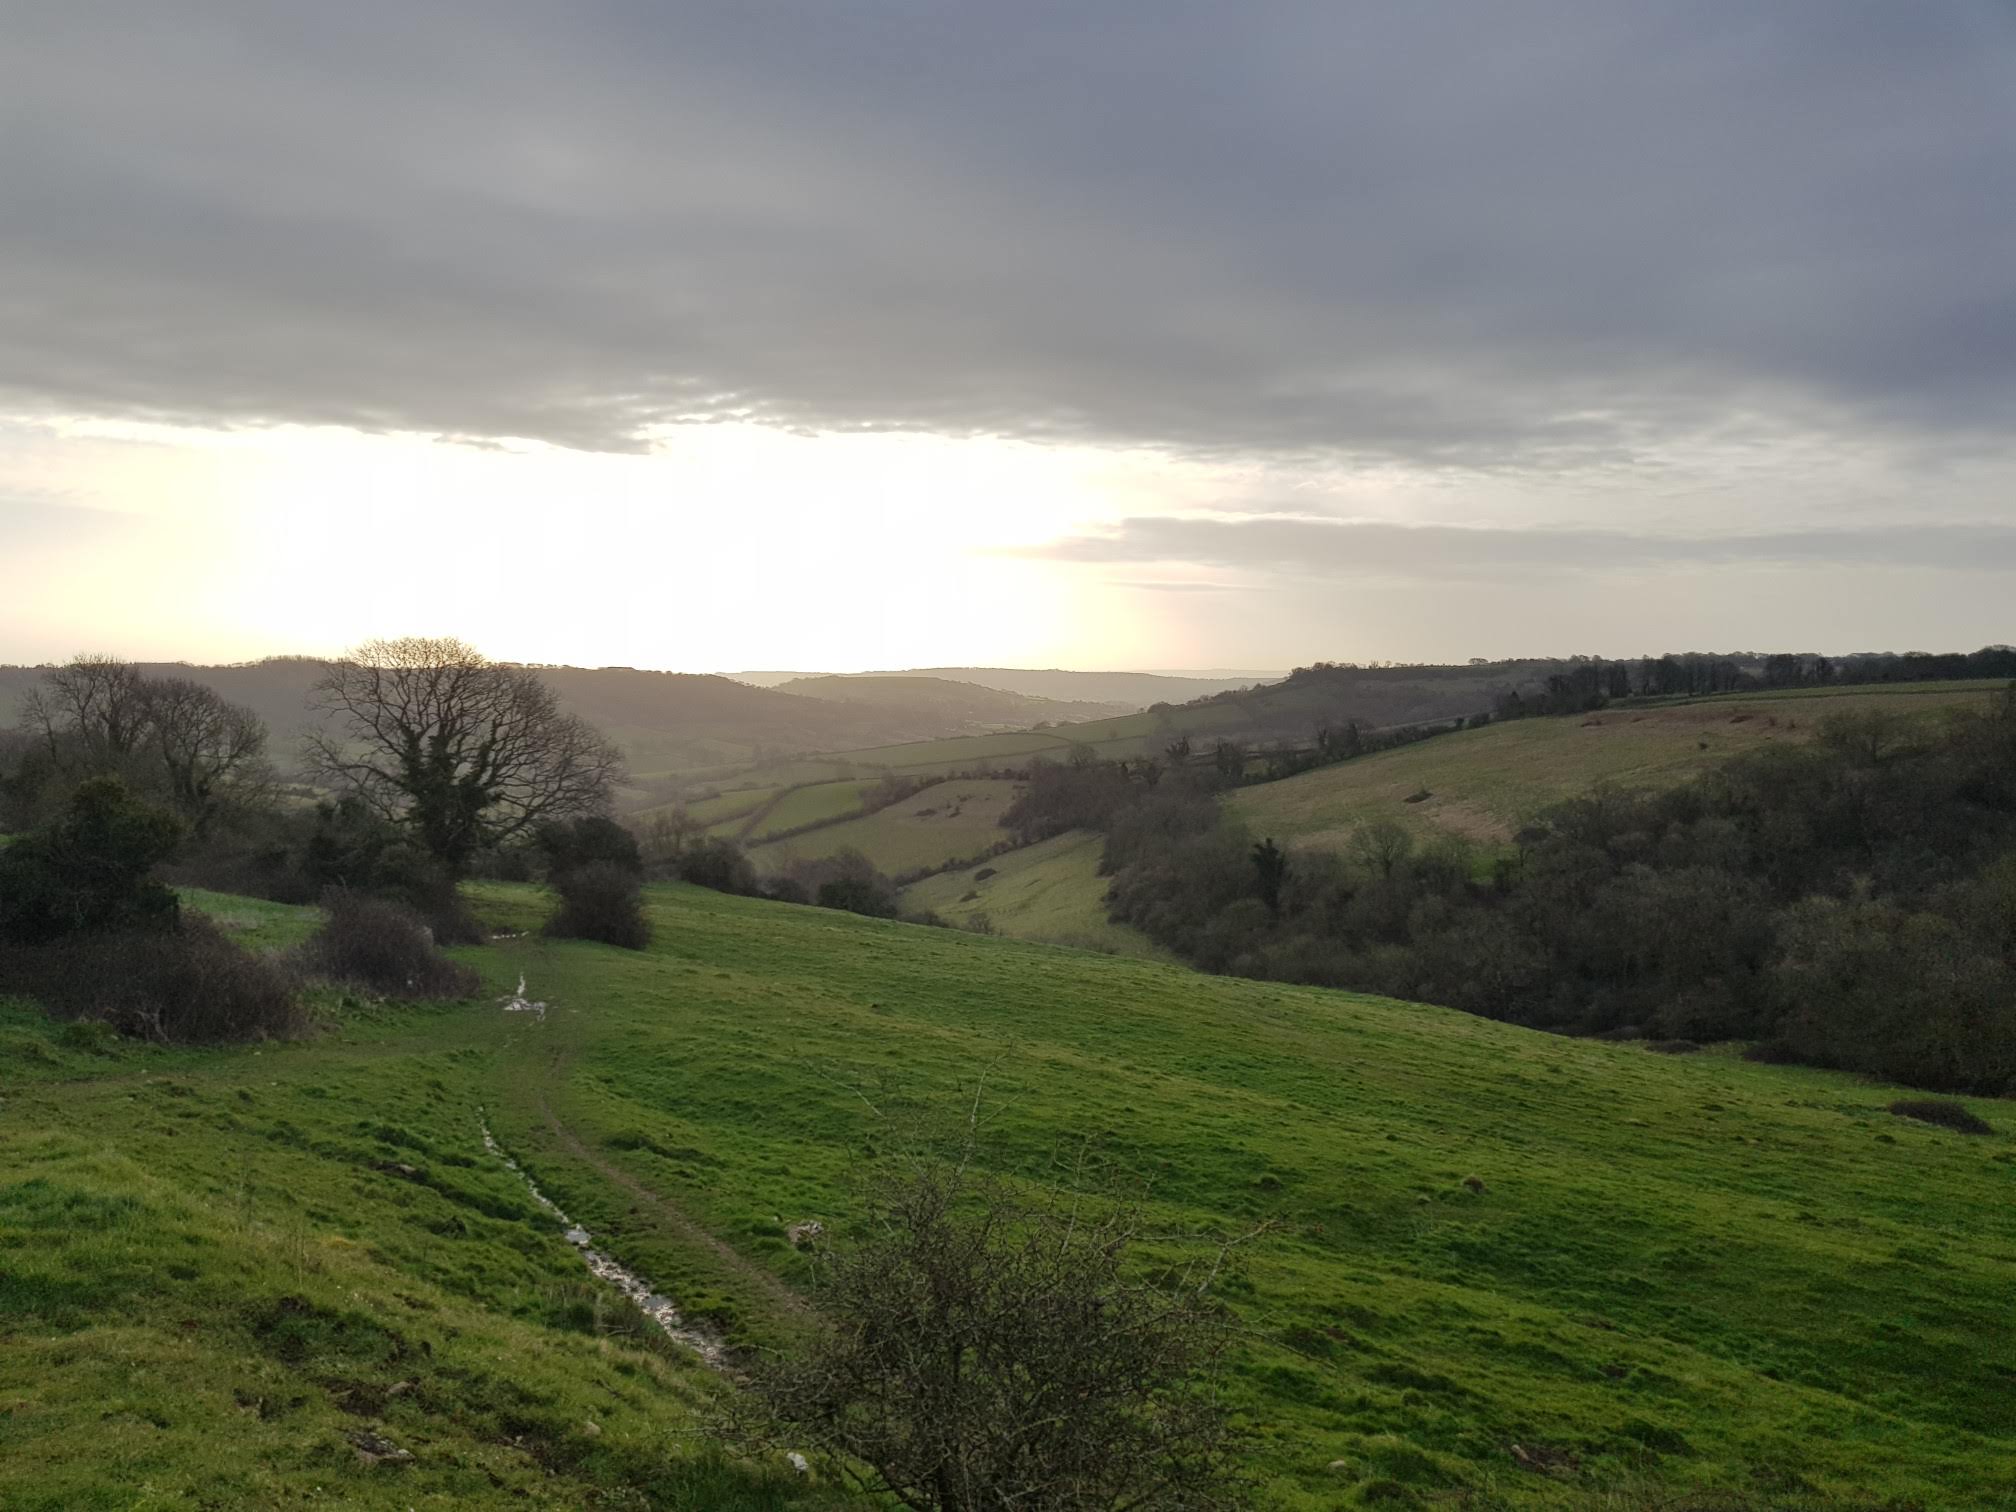 Cold Ashton to Bath Loop - Friday Route Recommendation